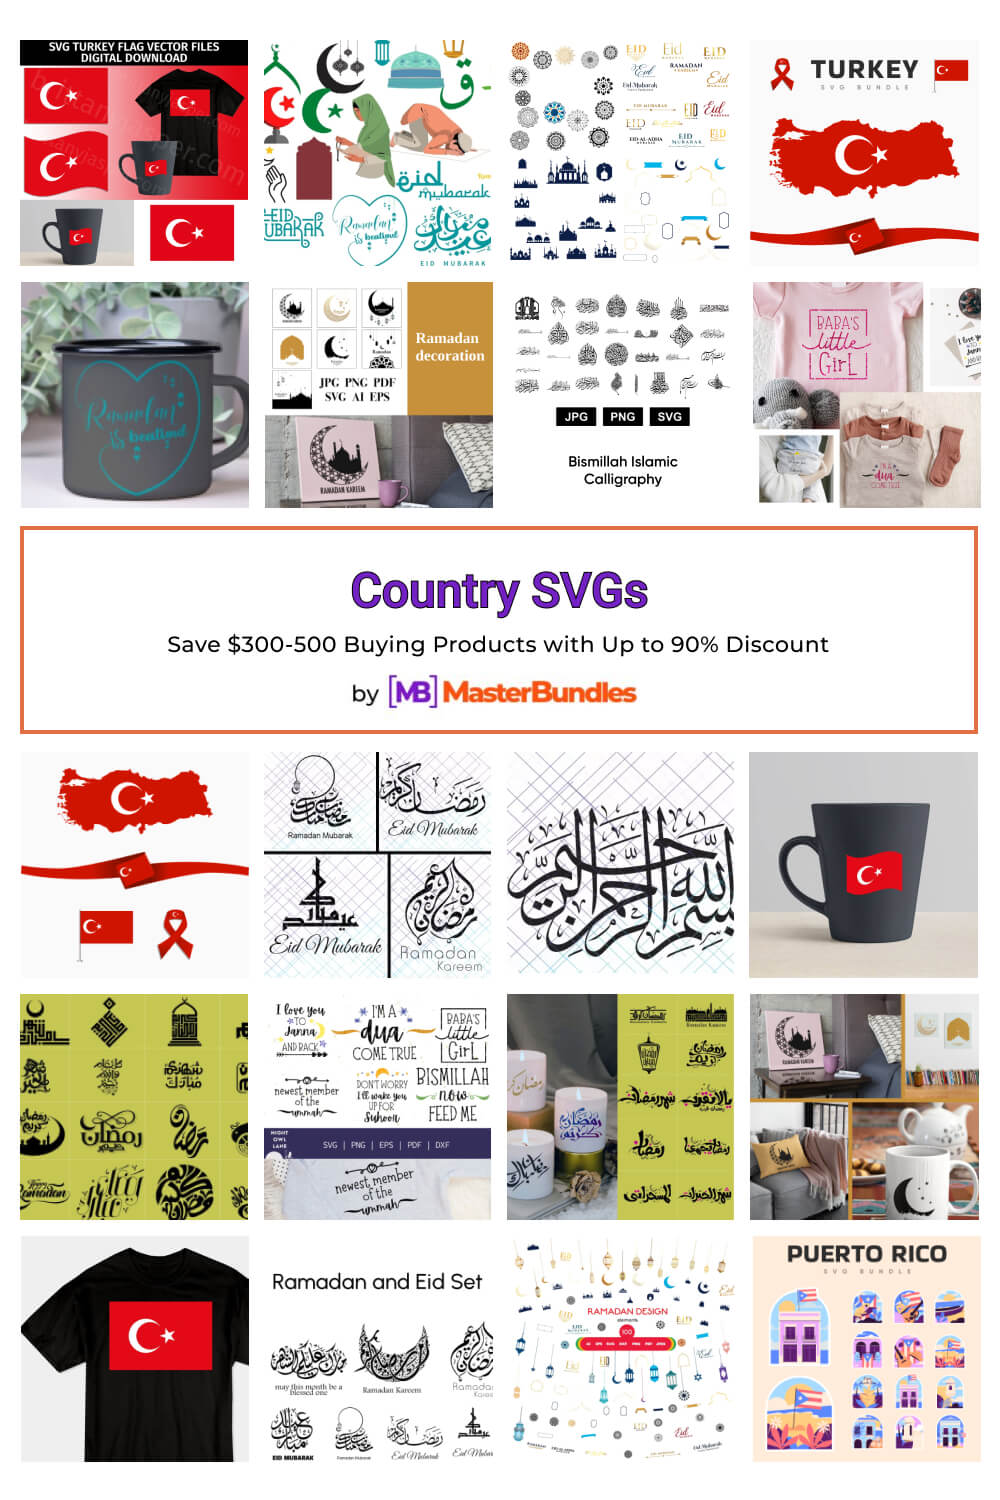 country svgs pinterest image.